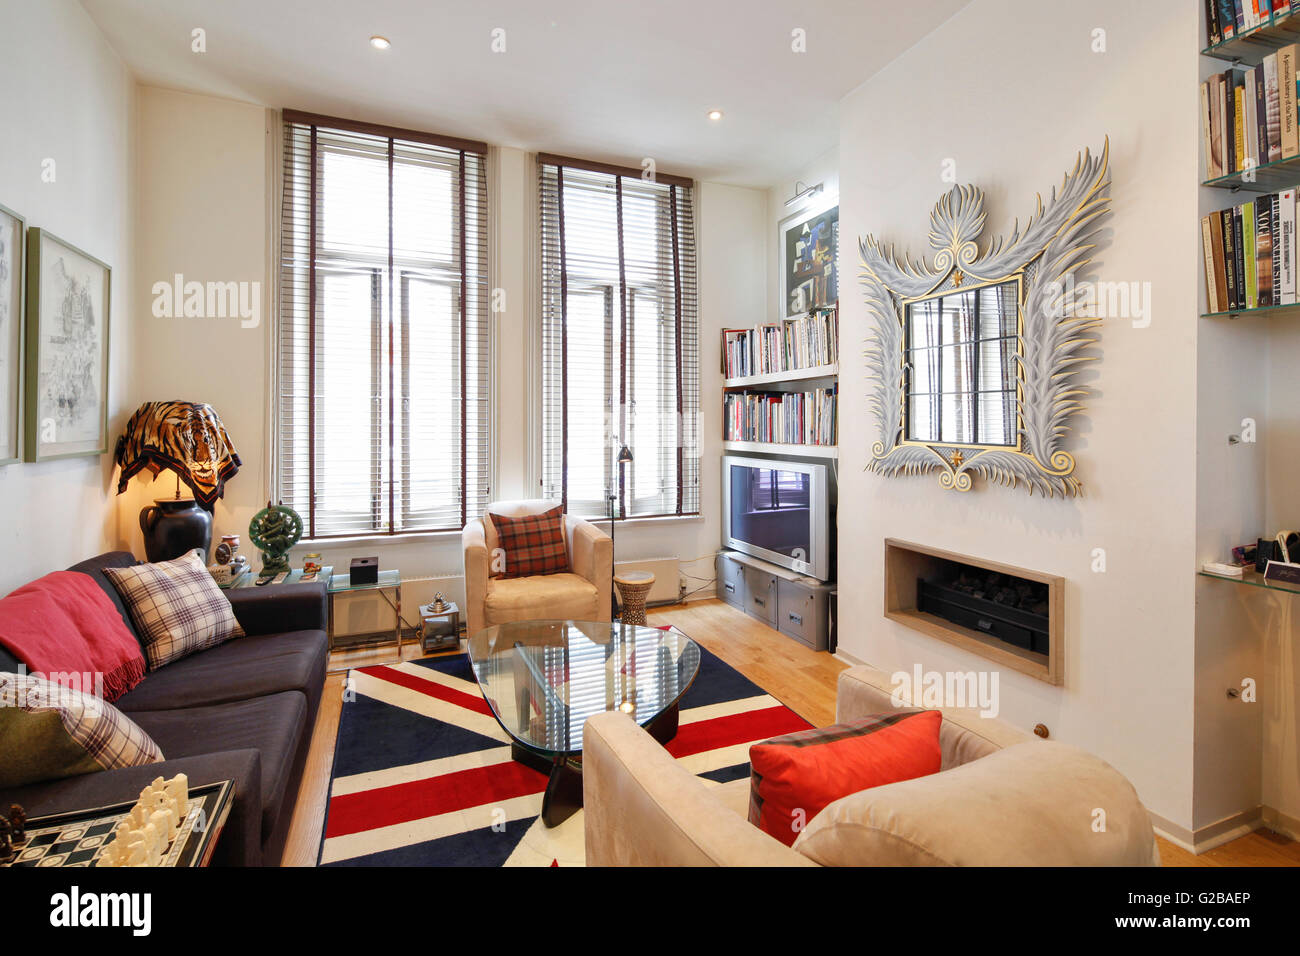 Foley House, Maddox Street. Spacious living room with large windows and contemporary furniture. Stock Photo